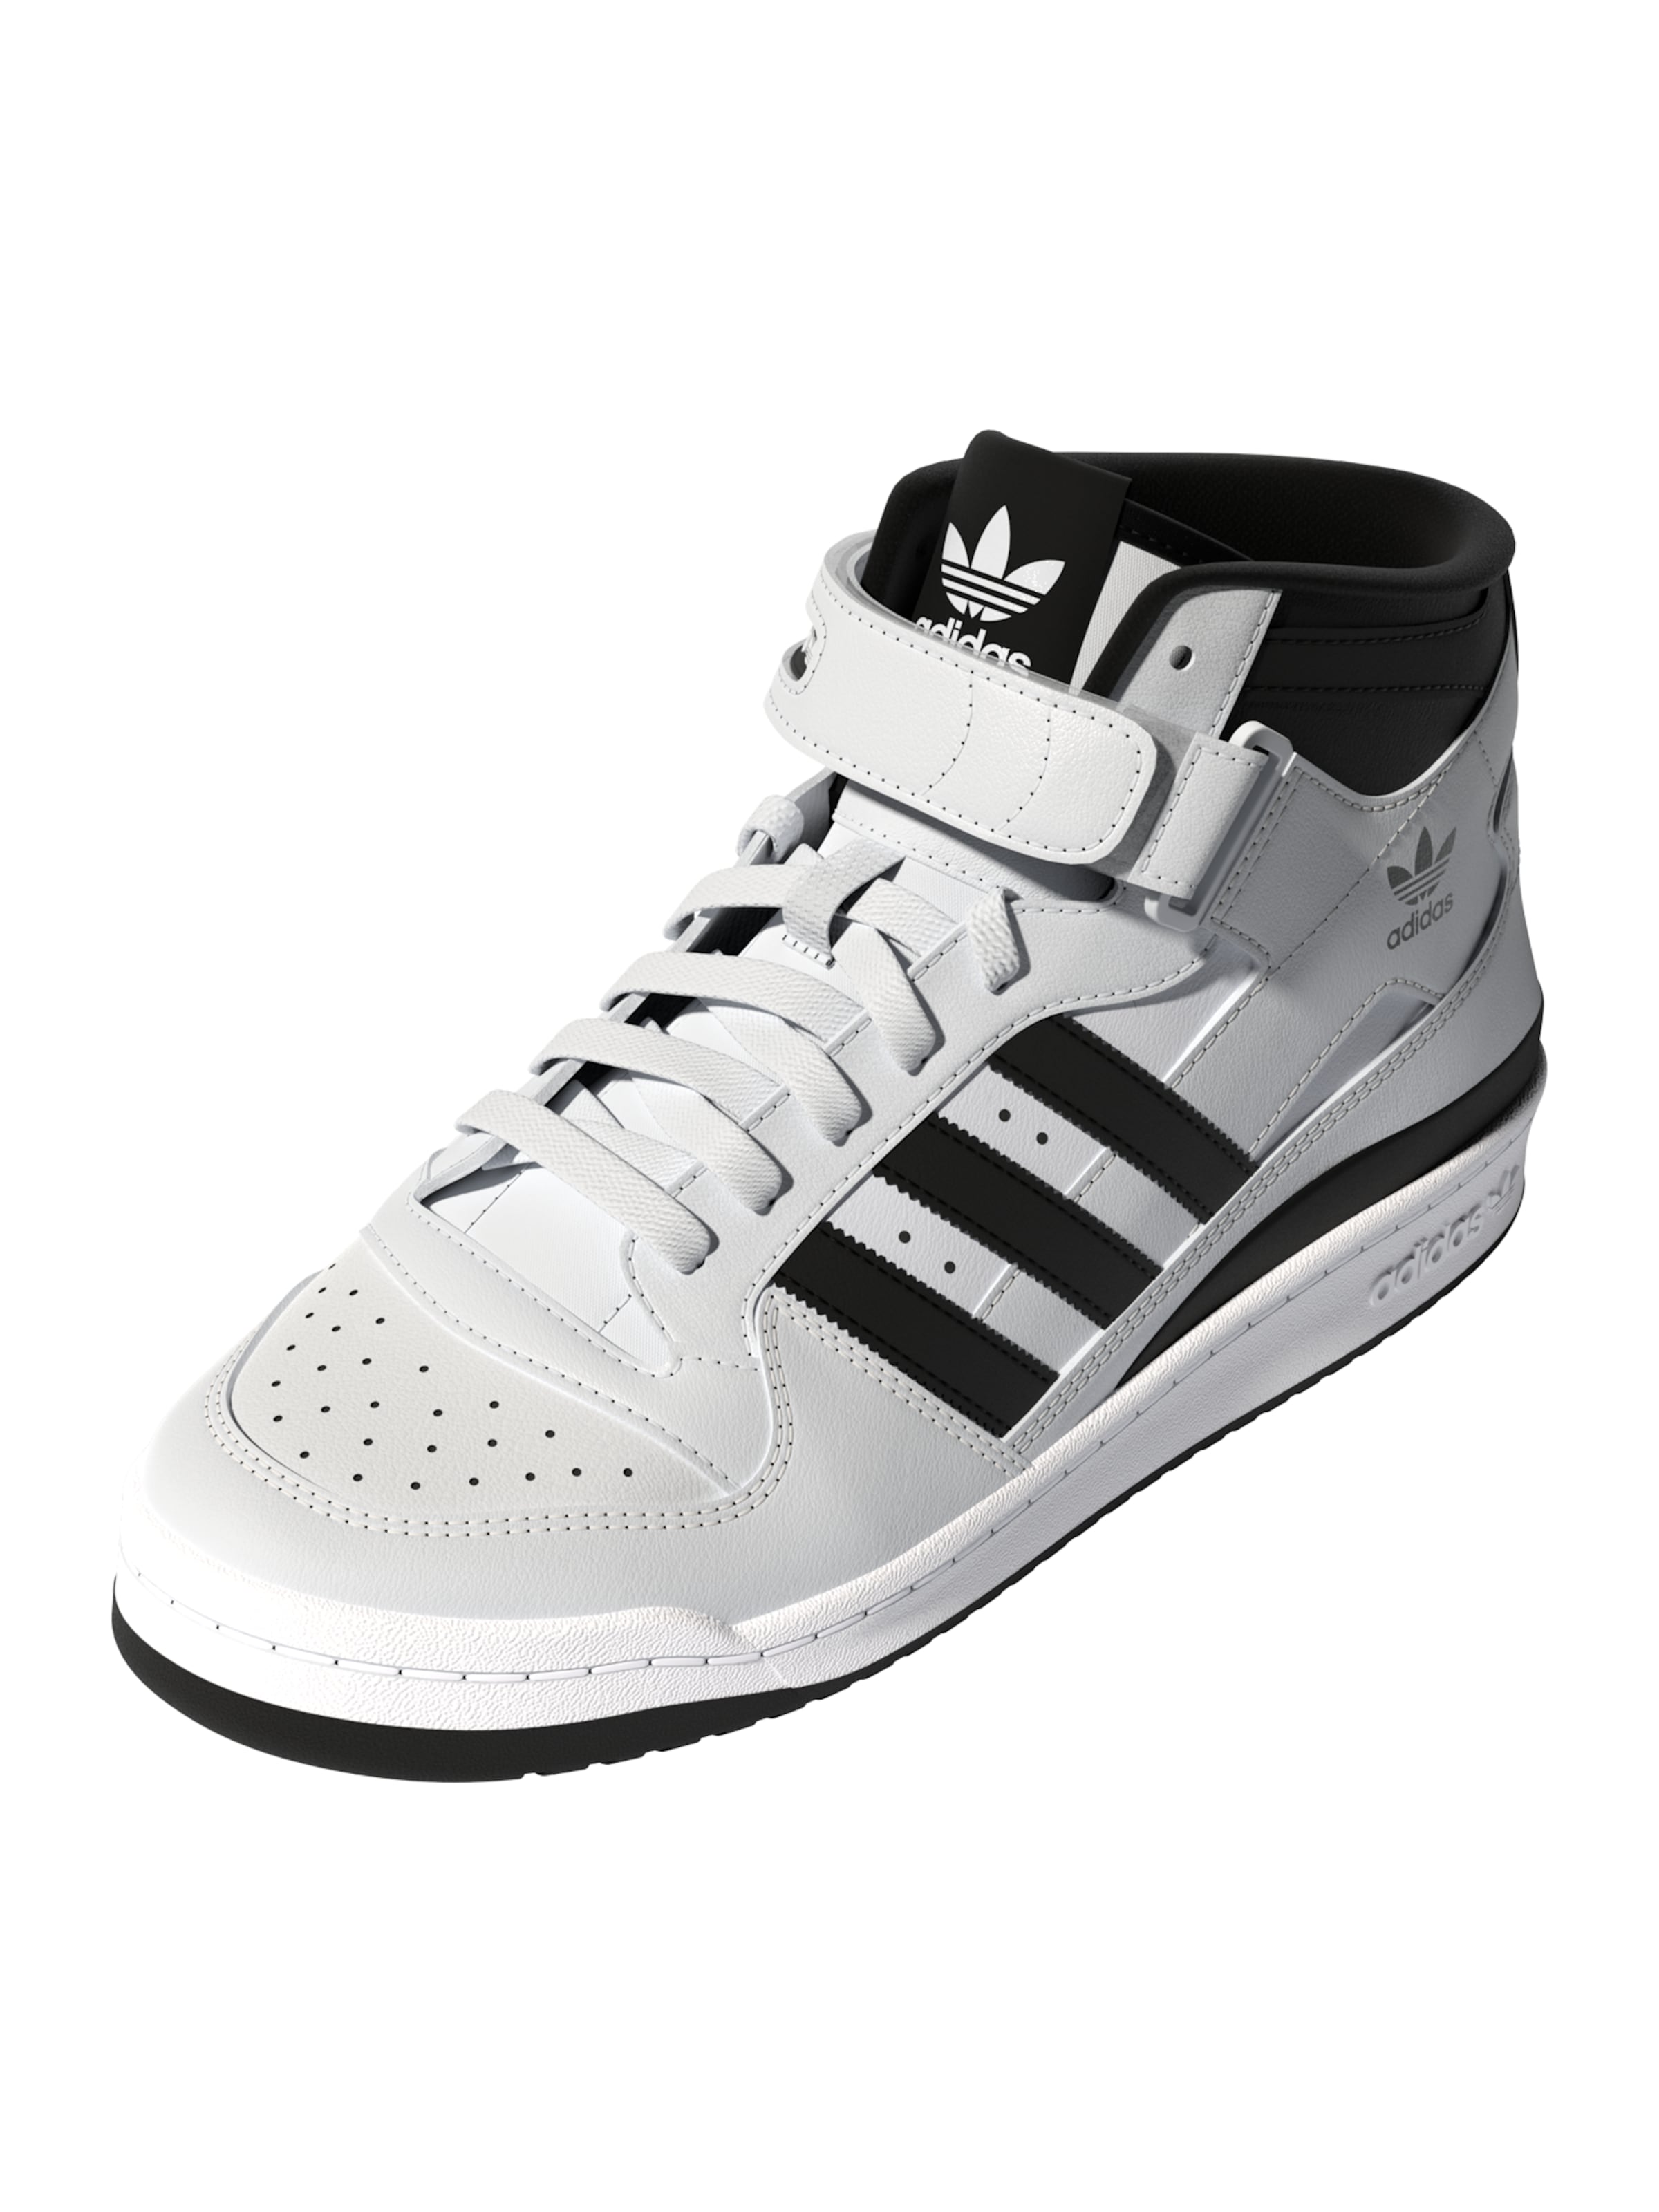 Details 212+ adidas high neck sneakers best